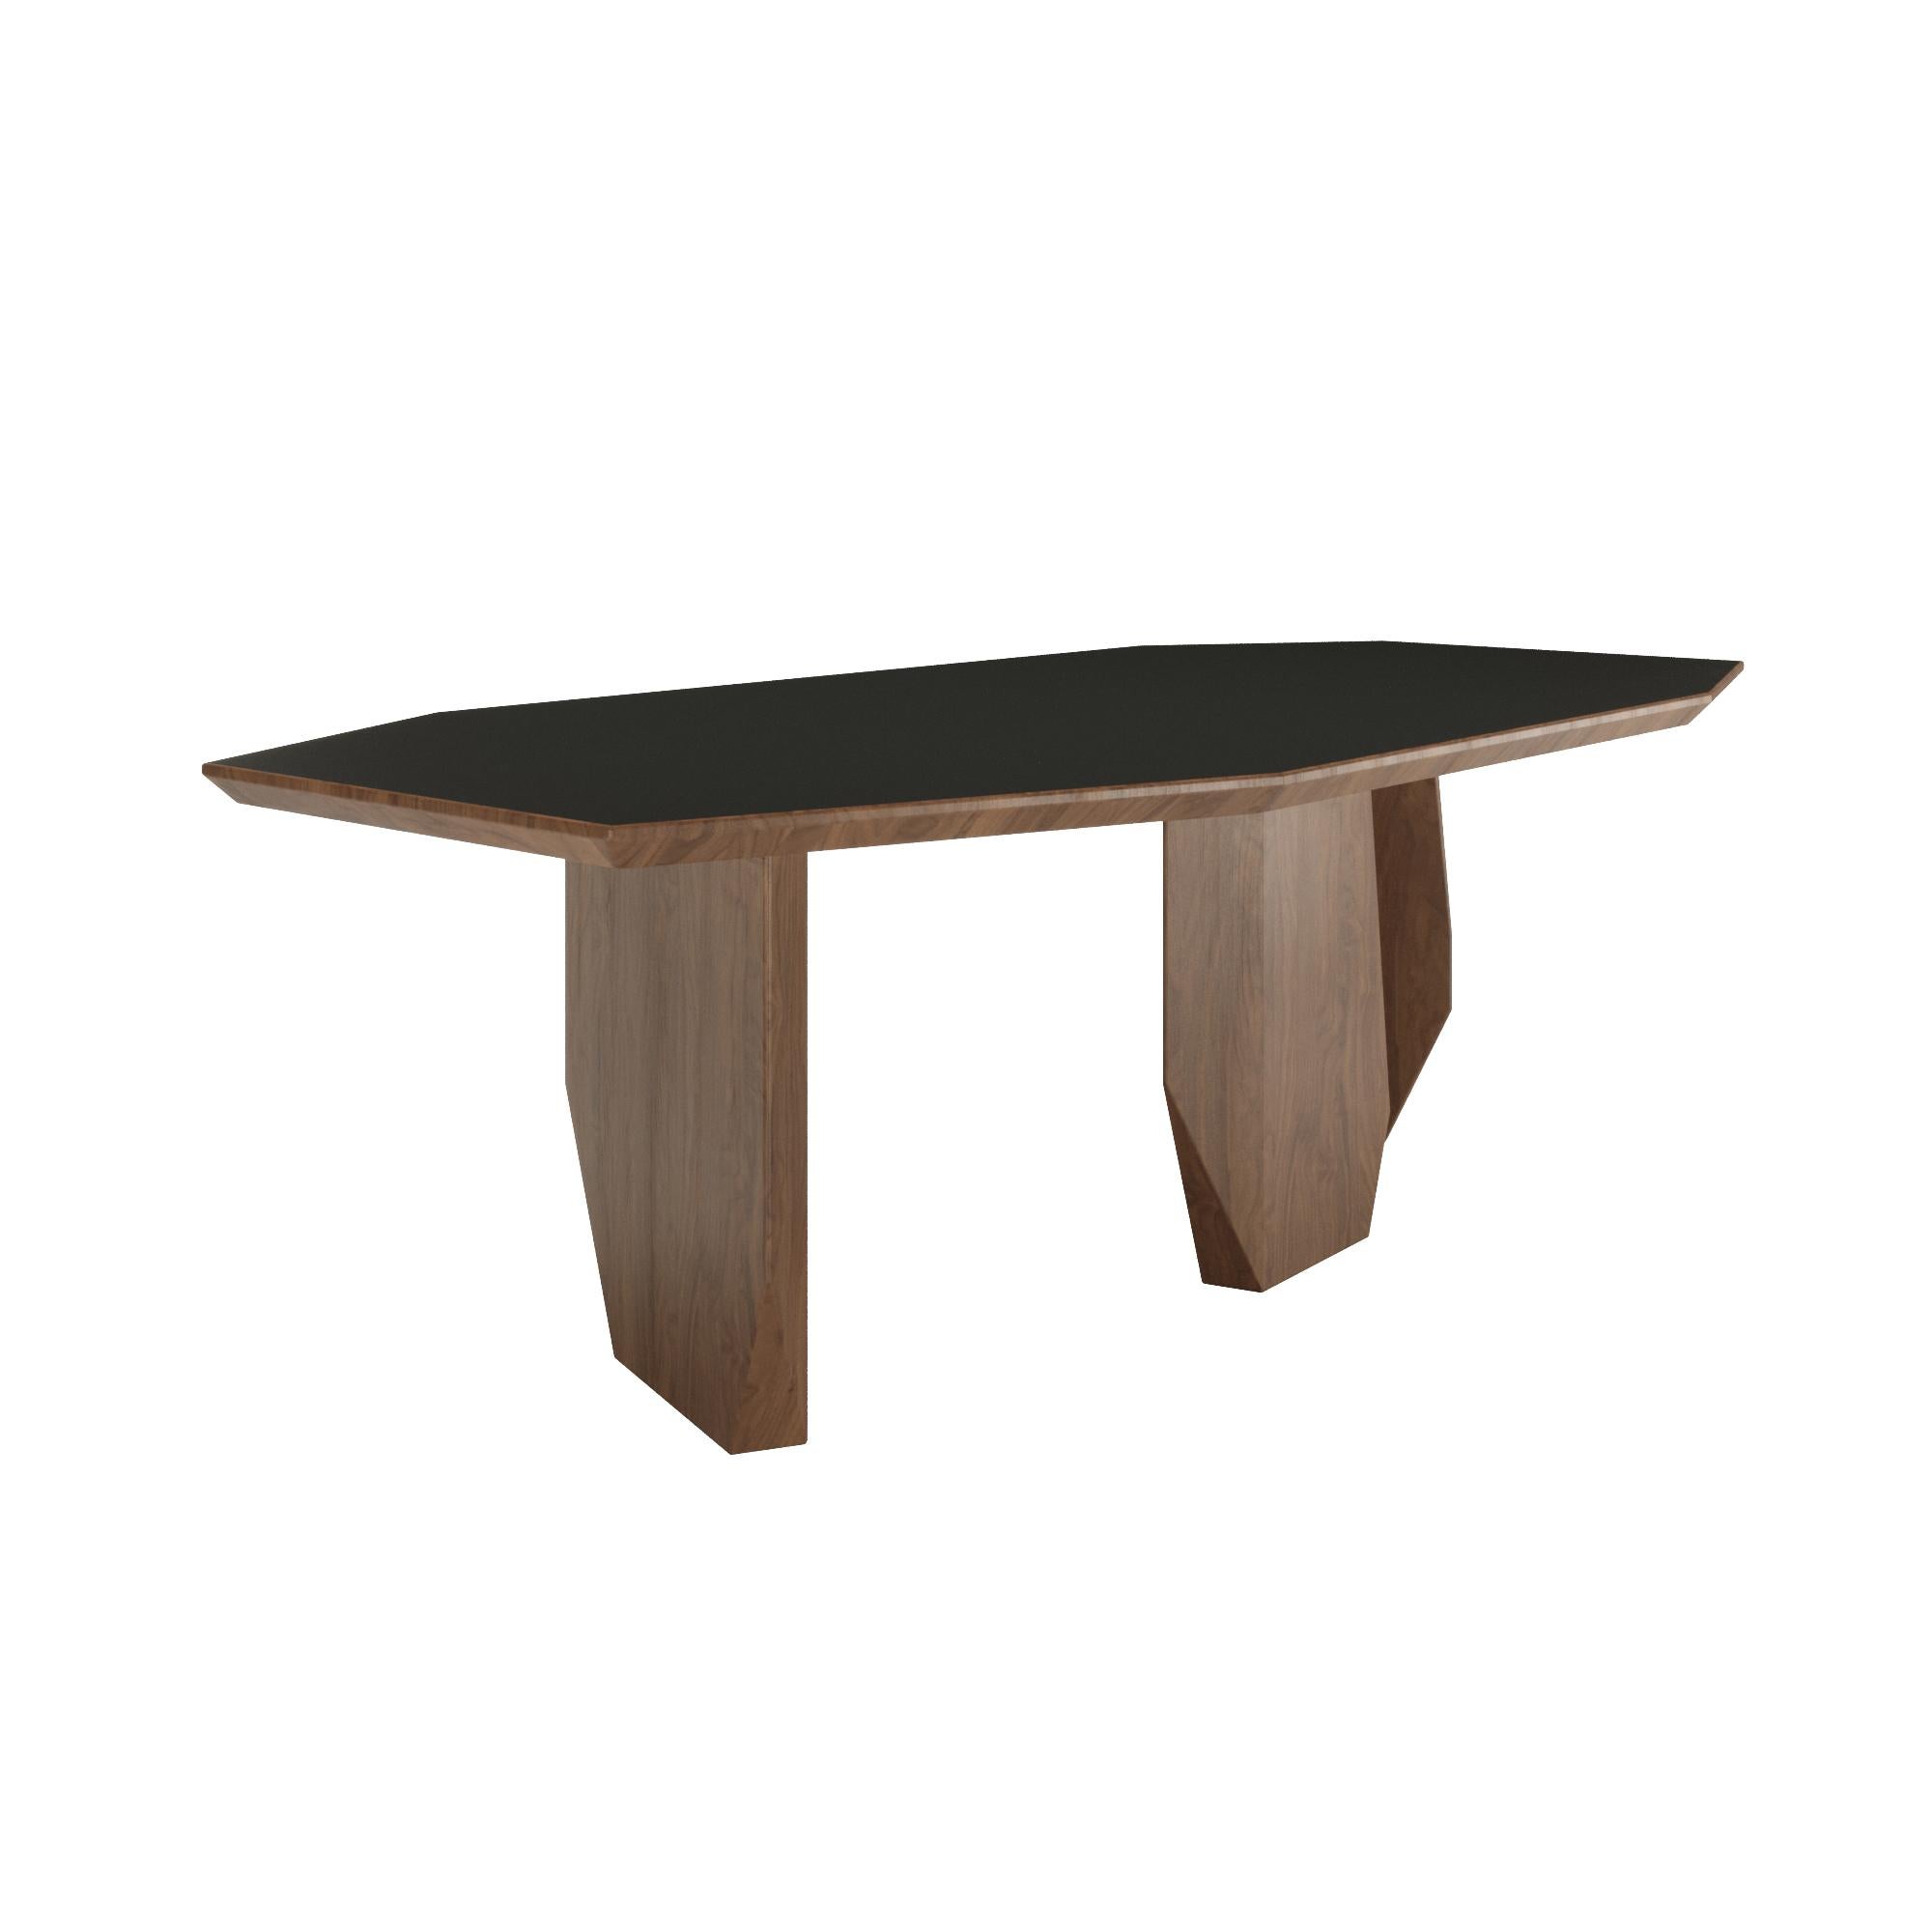 Introducing the exquisite Dolmen Table, meticulously crafted with a harmonious blend of human touch and premium solid wood. This design has a distinctiveness derived from the captivating fusion of organic wood textures and skilled craftsmanship.